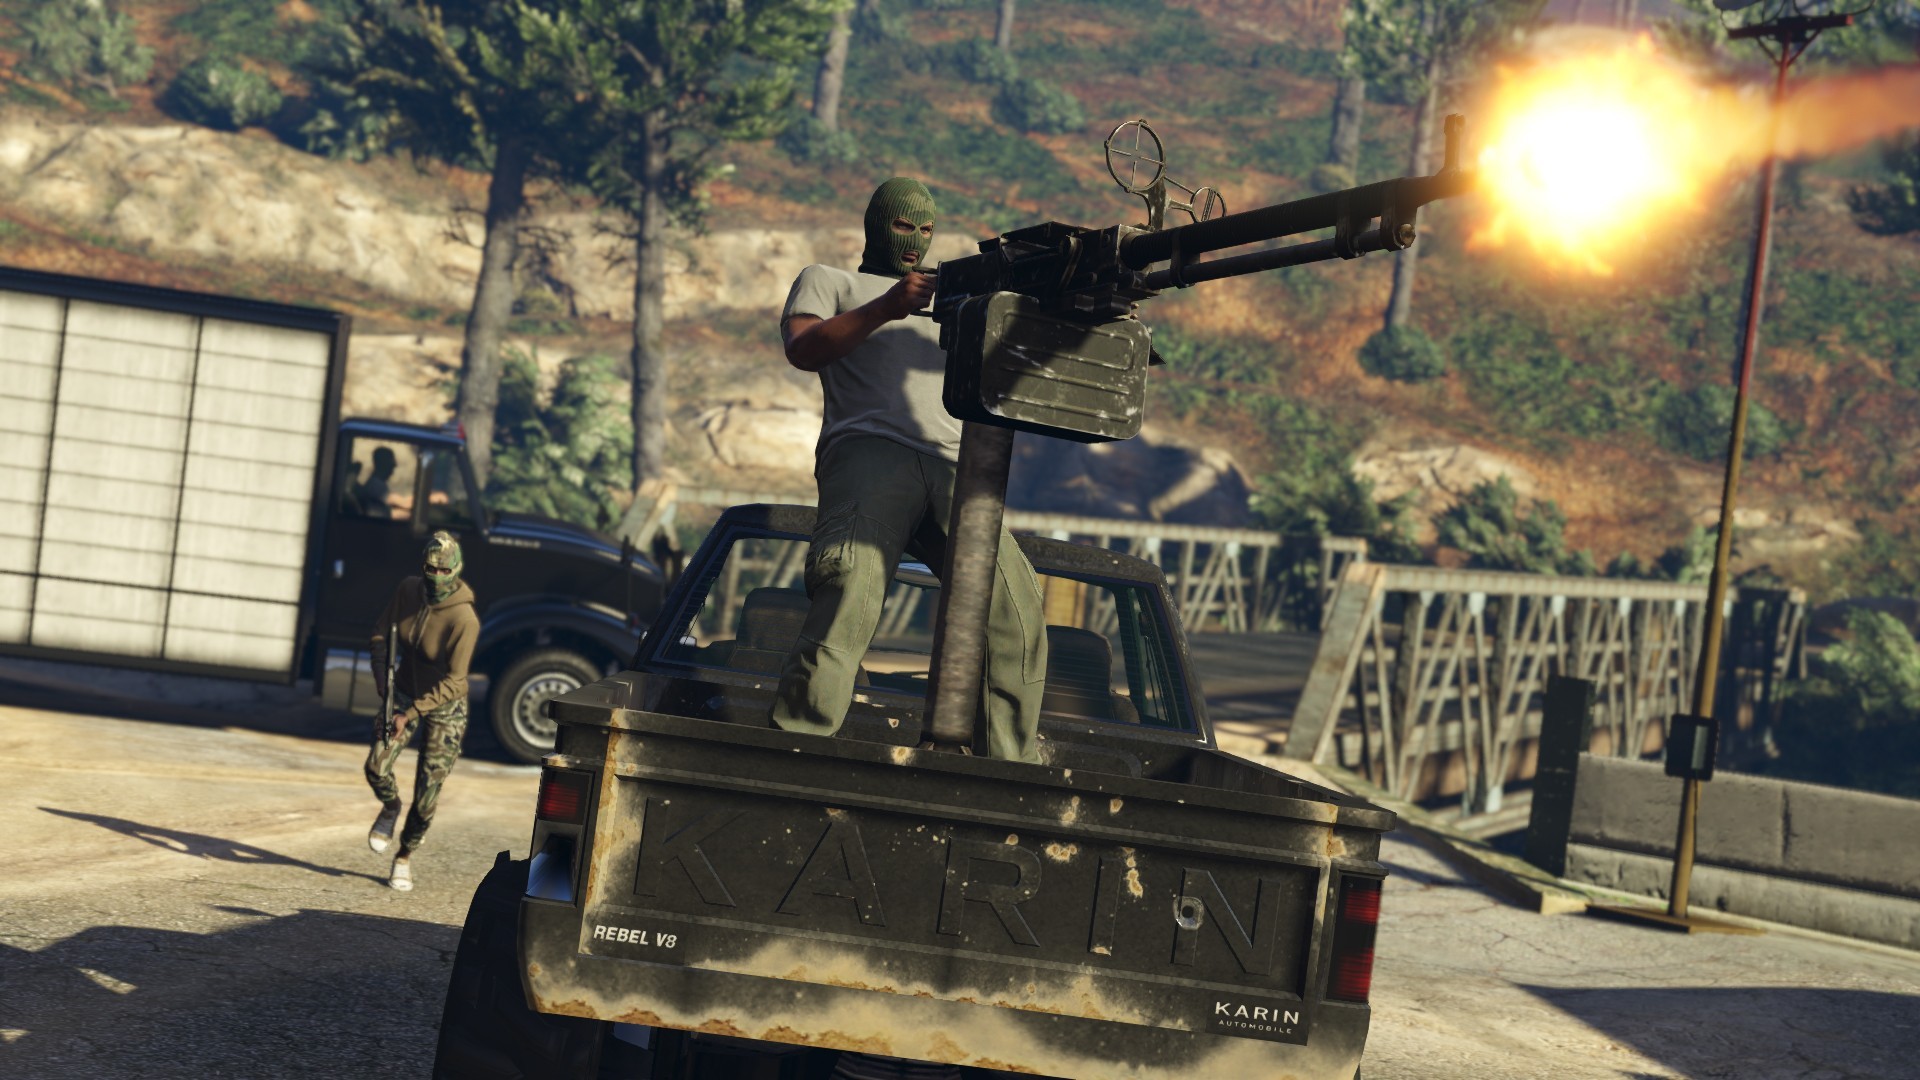 Download Now GTA 5 Update 1.09 on PS4 & Xbox One, Patch 1.23 on